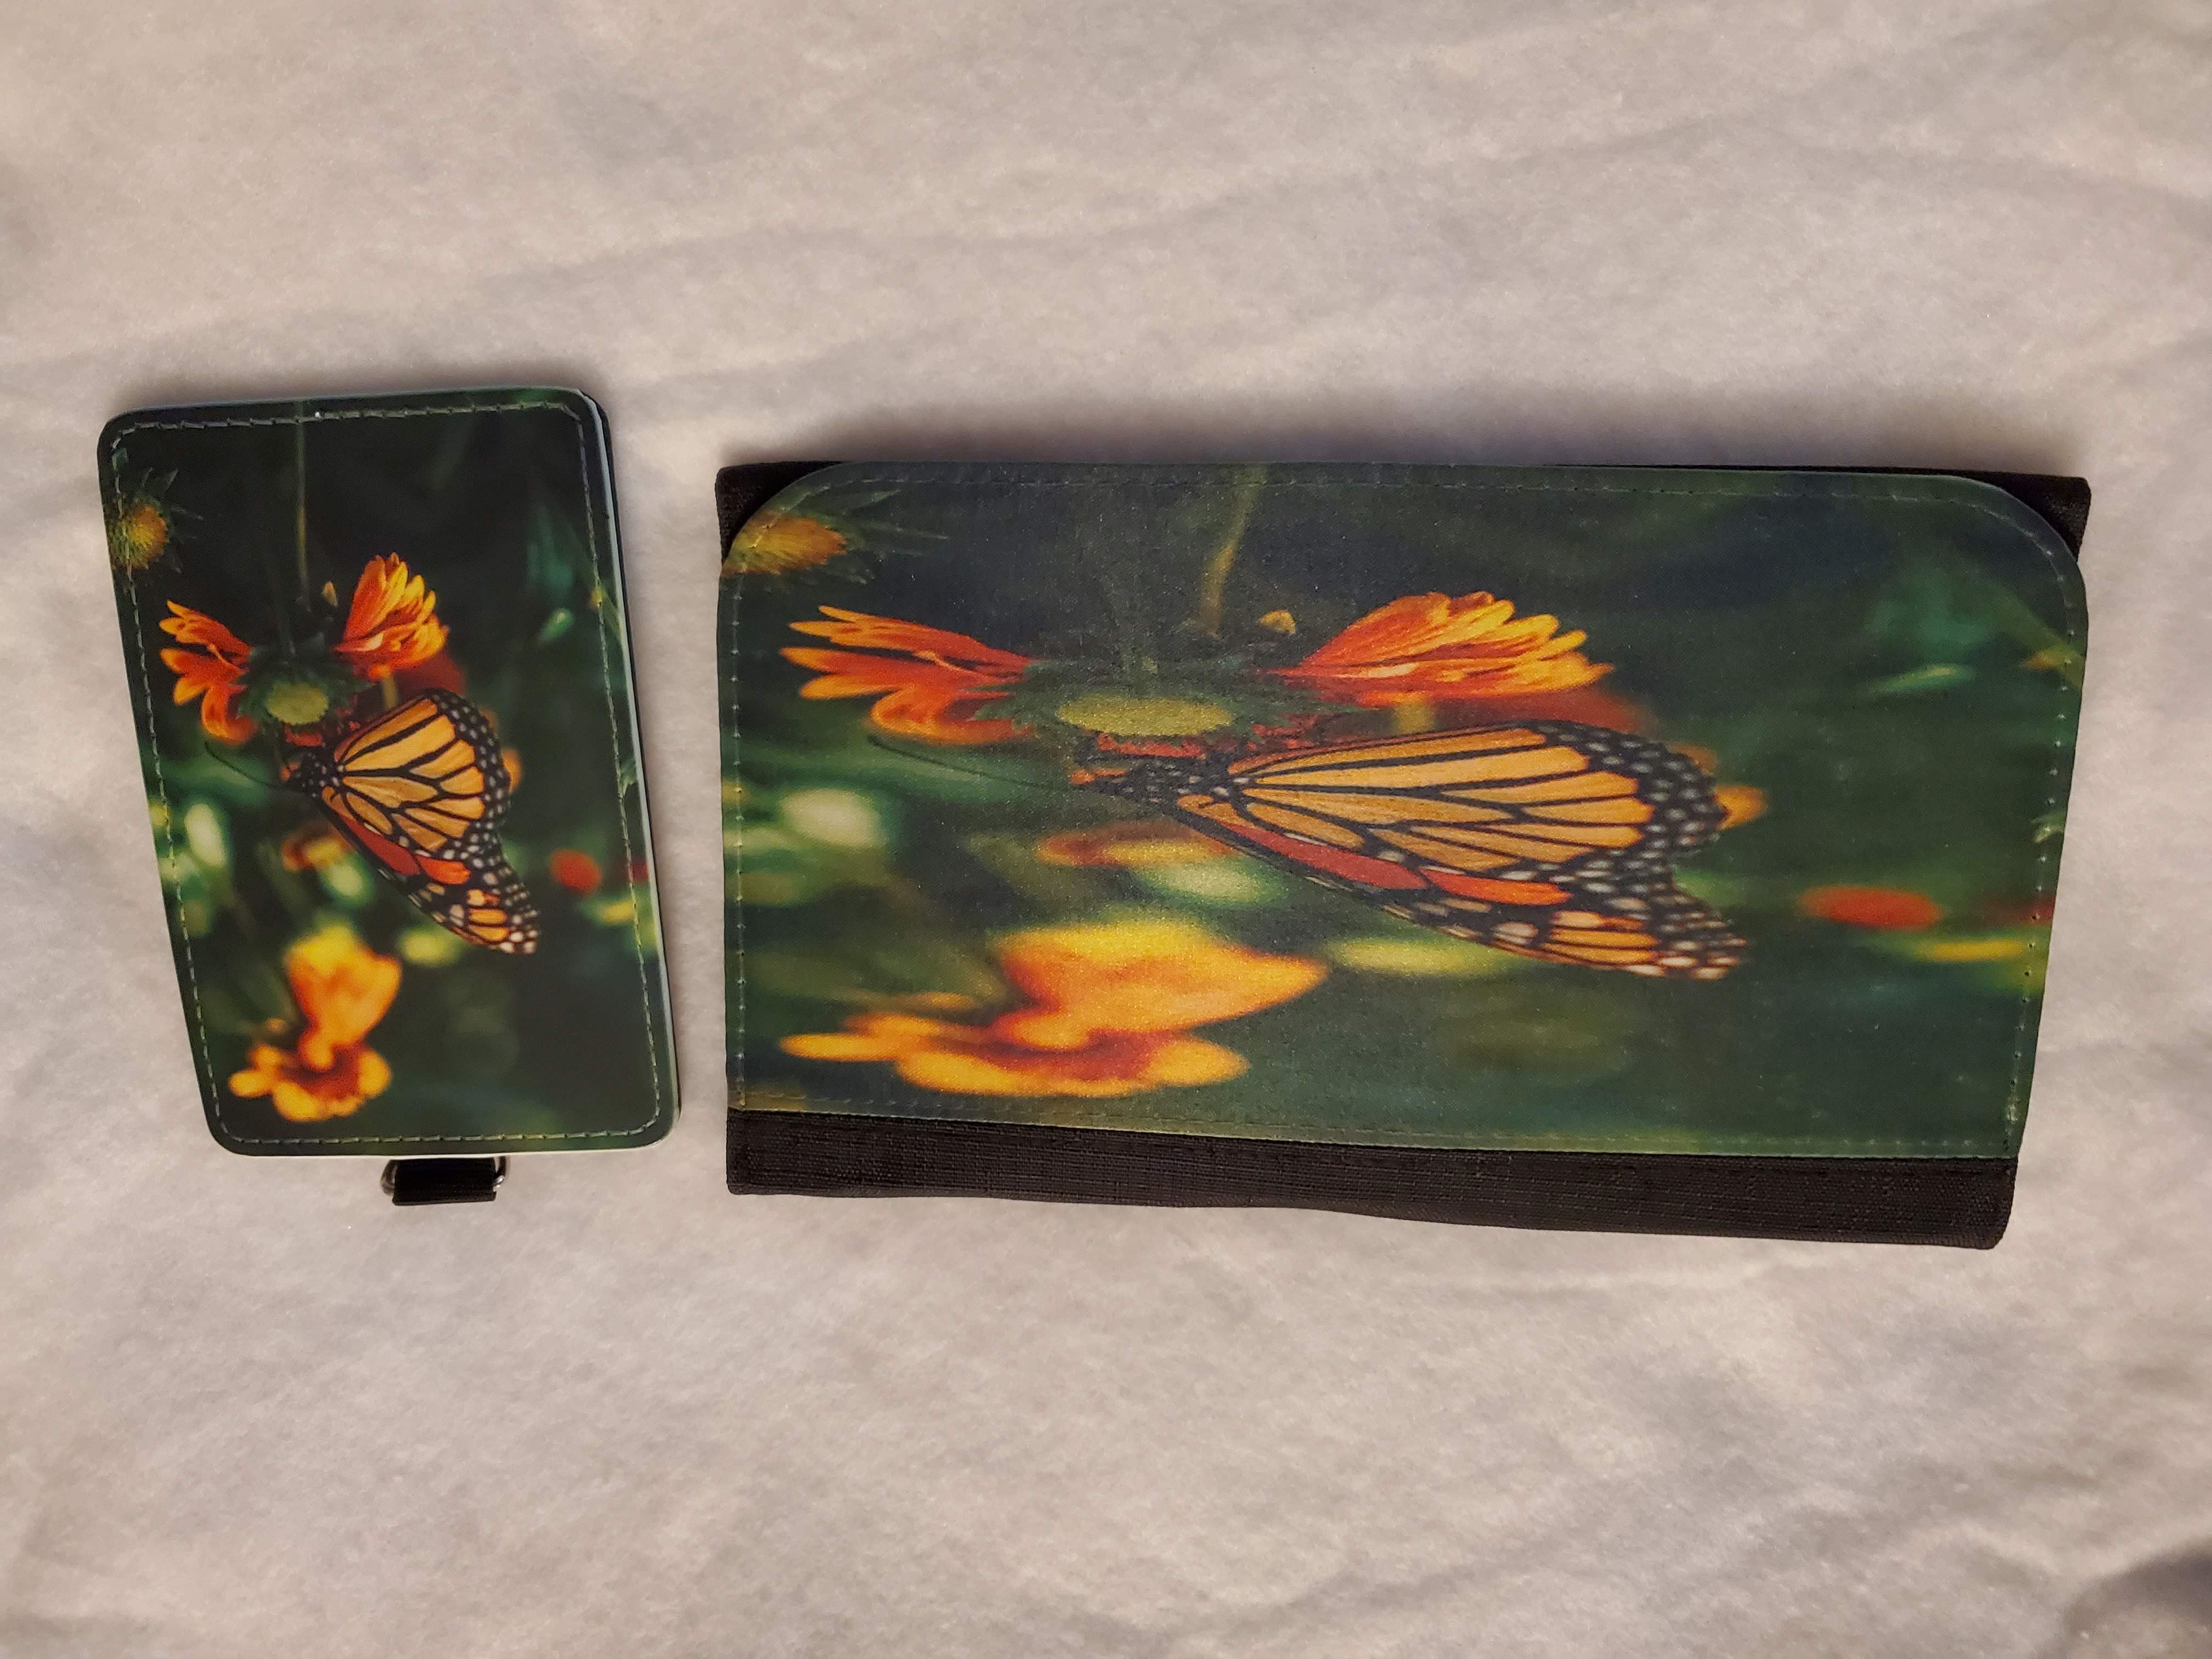 Matching wallet and keychain made with sublimation printing